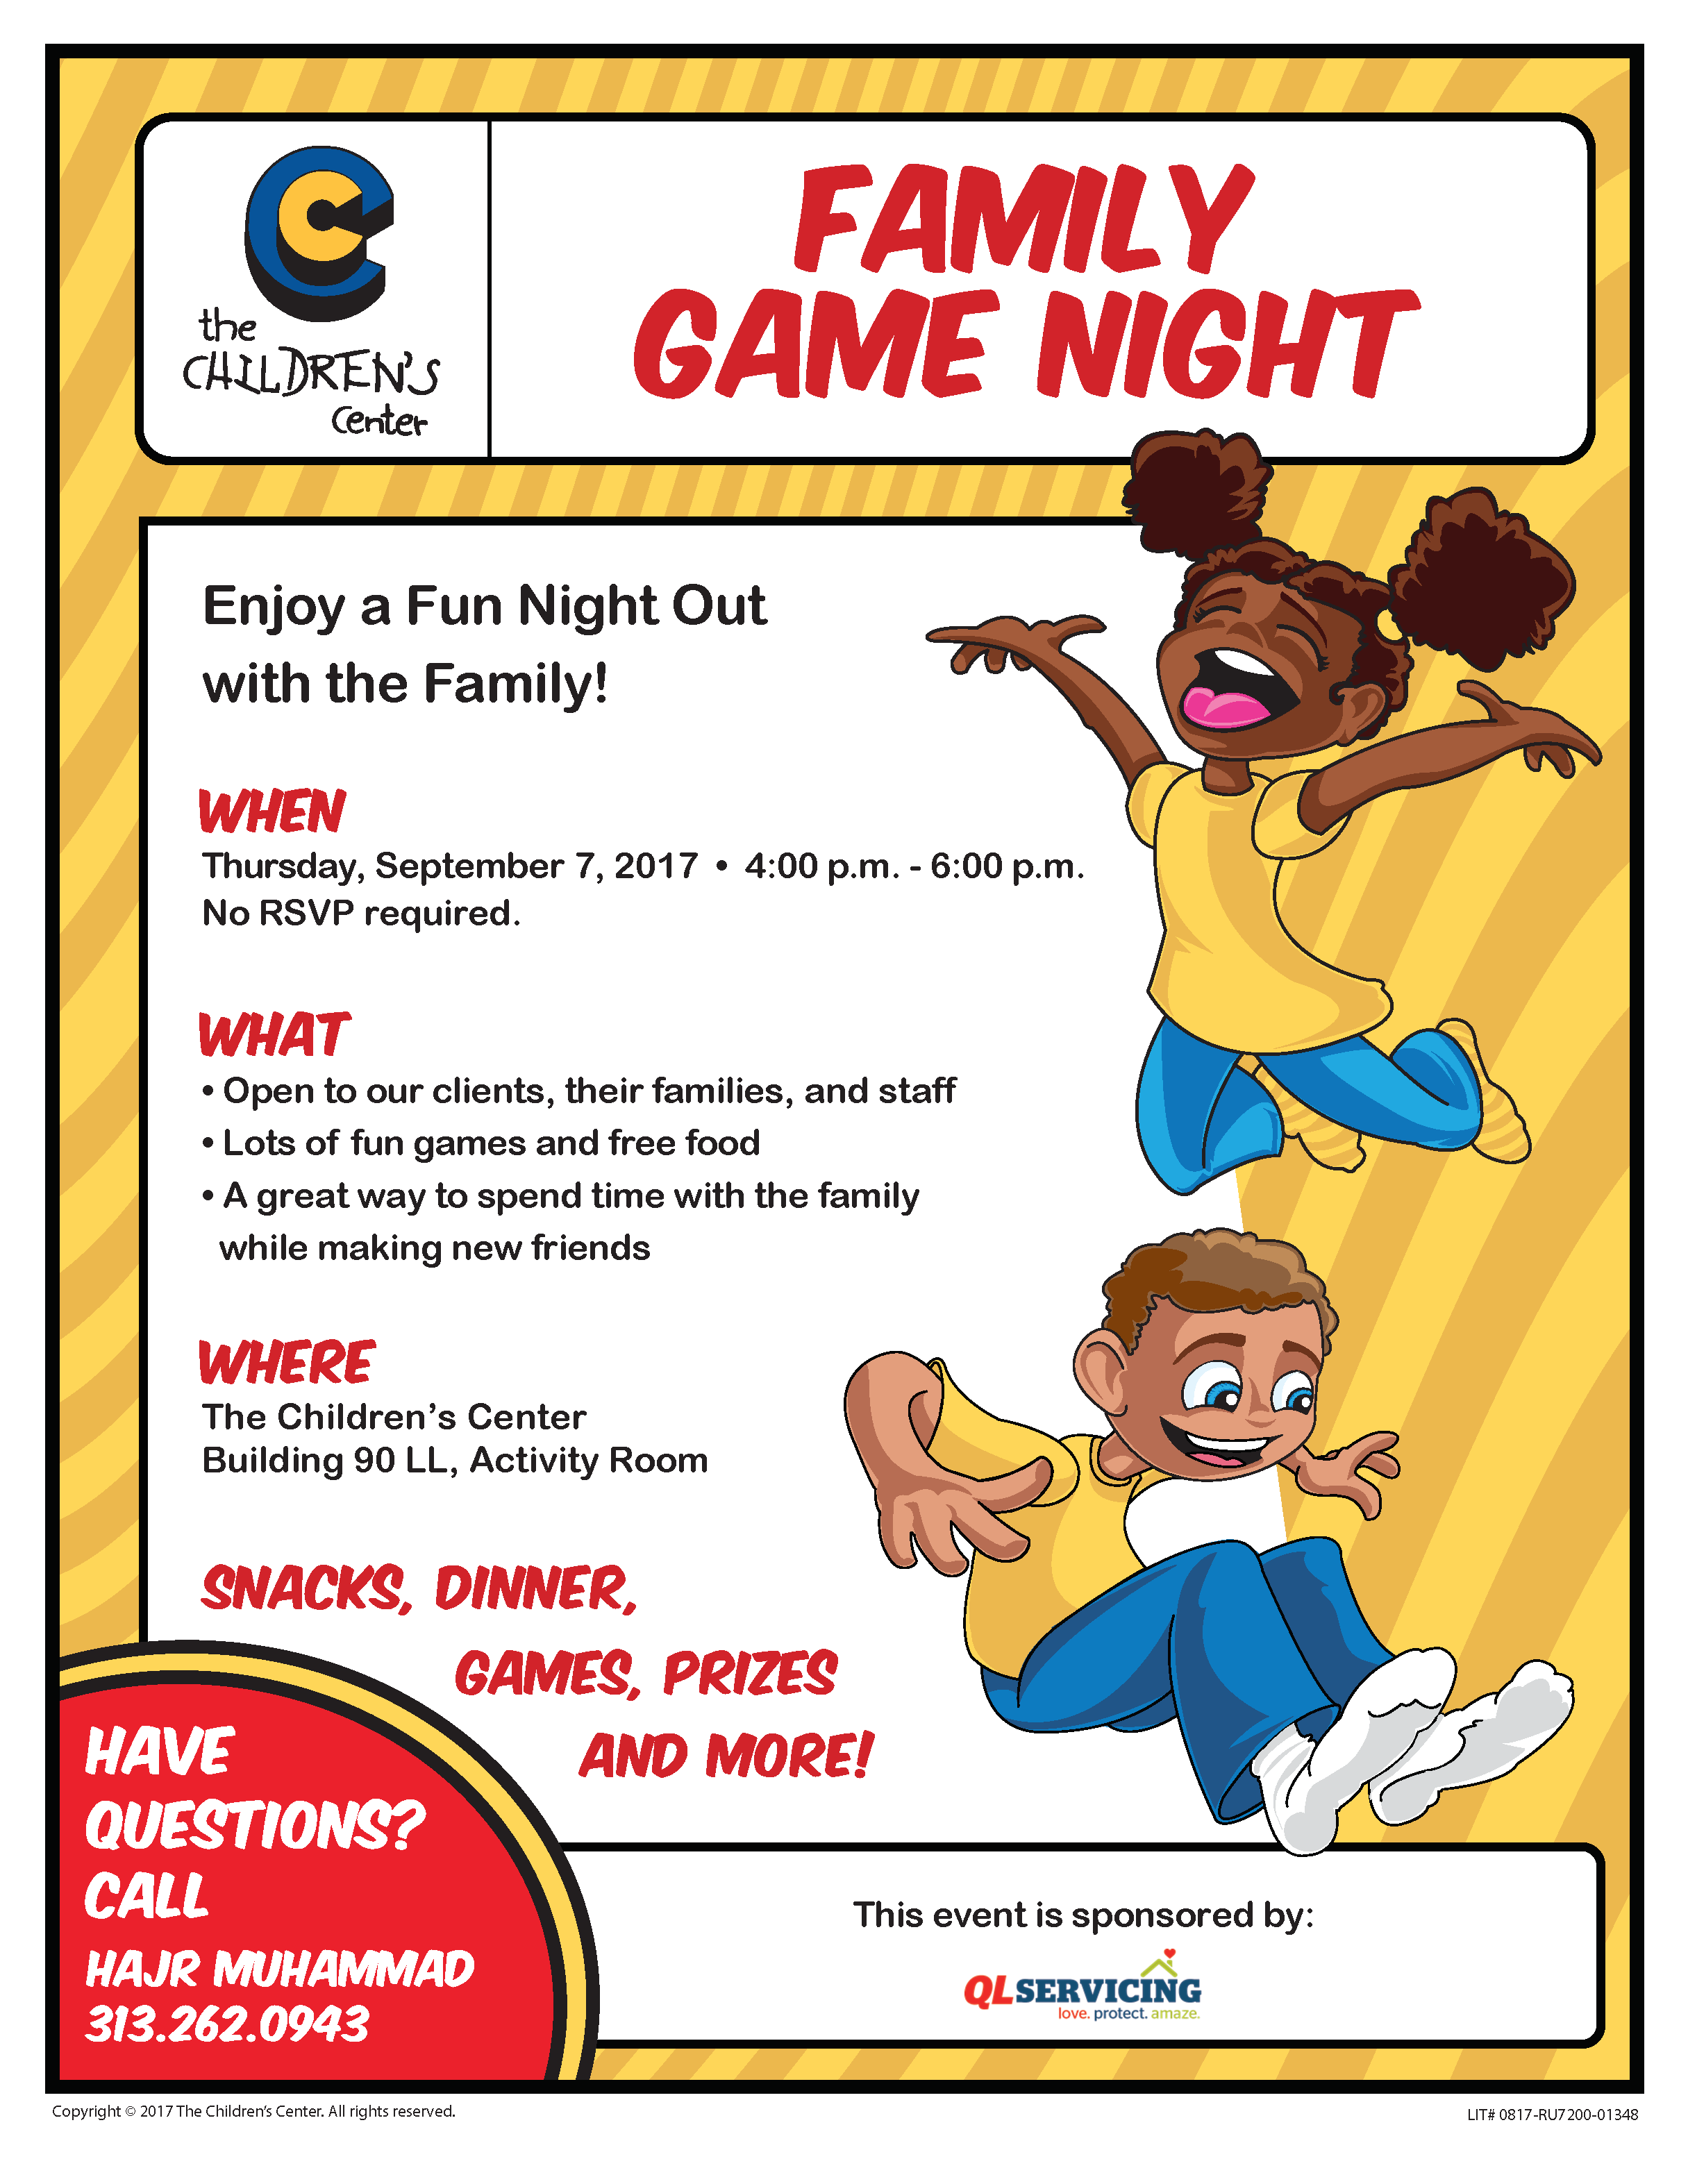 https://www.thechildrenscenter.com/wp-content/uploads/2017/09/family-game-night_flyer_sept_0817-ru7200-01348.png